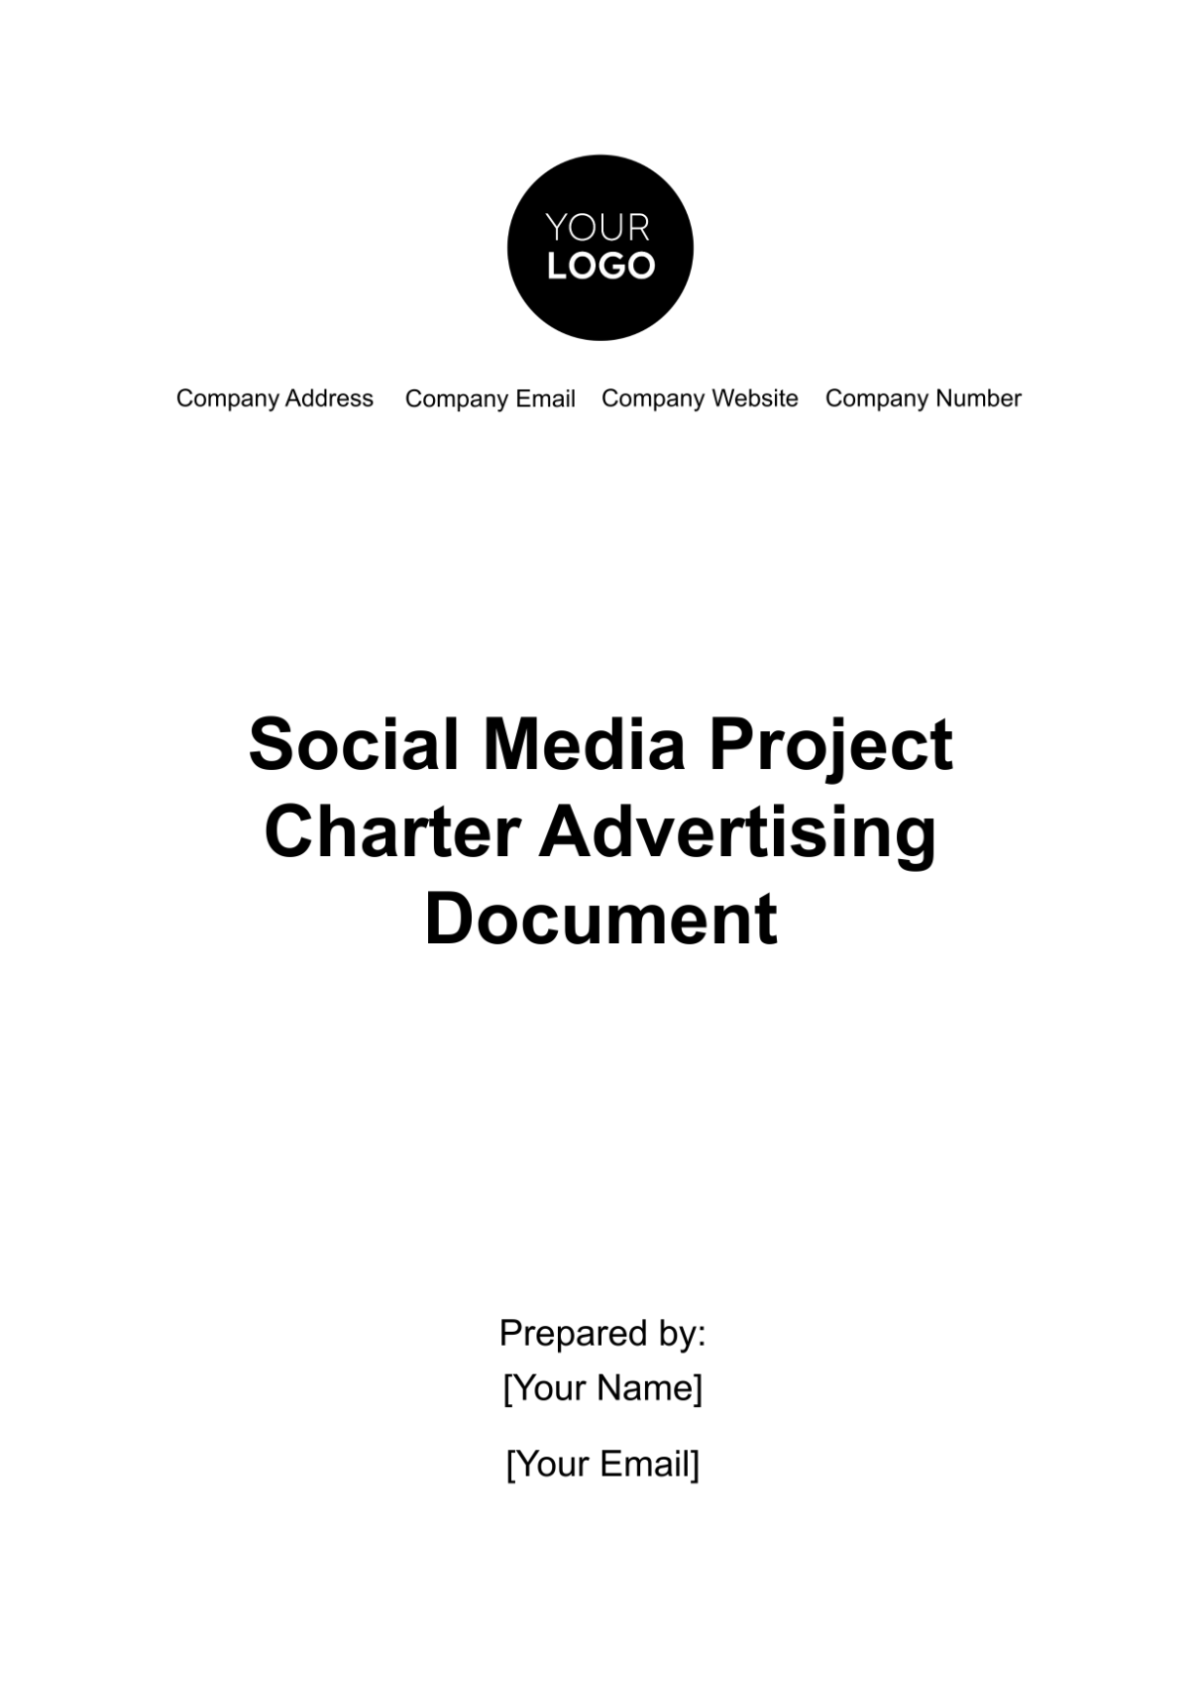 Free Social Media Project Charter Advertising Document Template